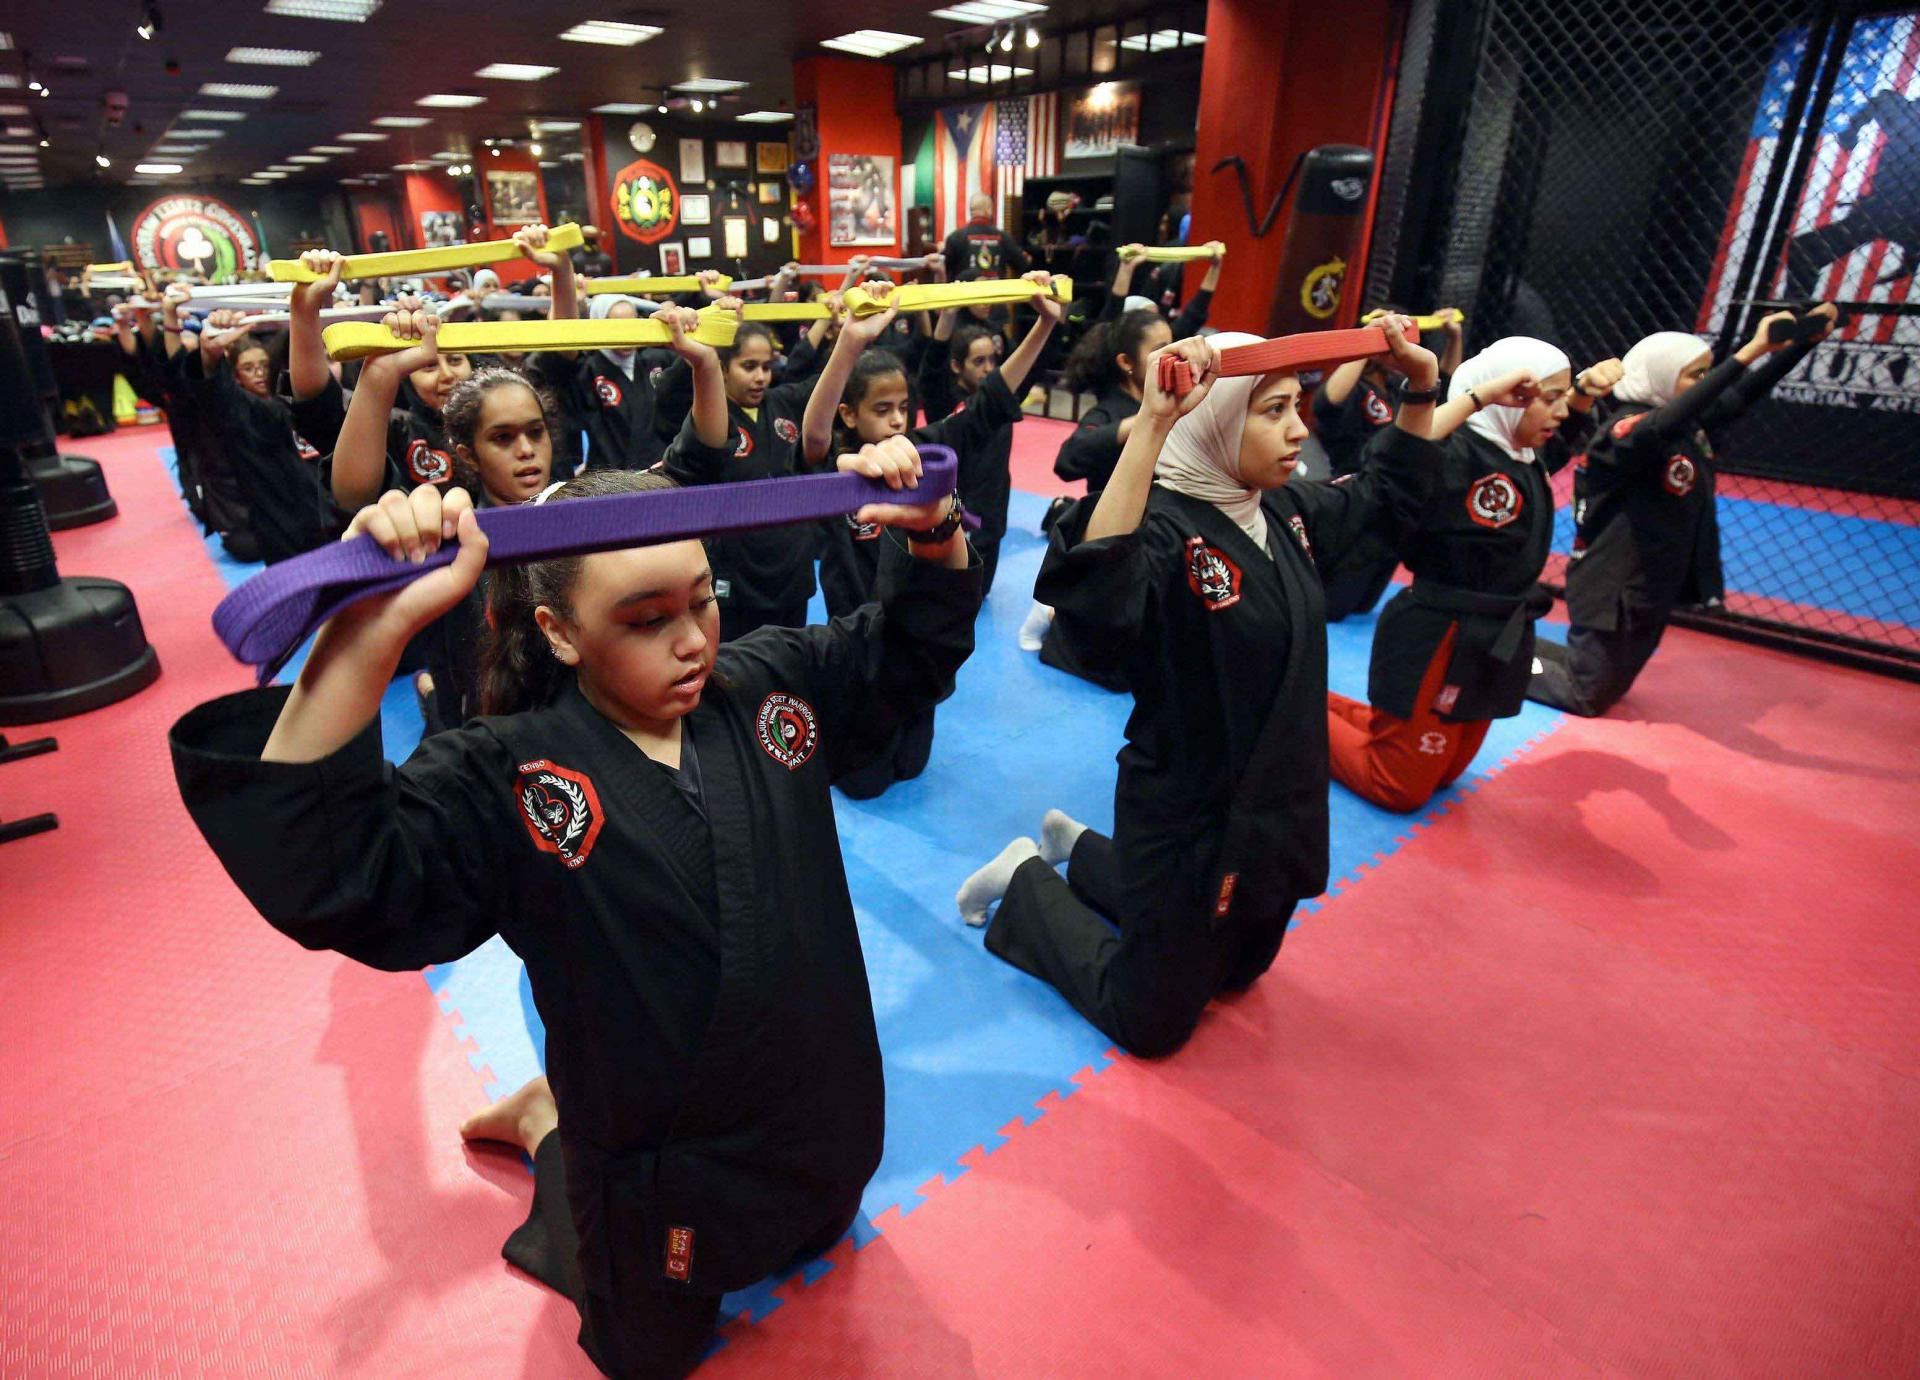 In the rest of the Gulf, the sport of kajukenbo remains relatively unknown.